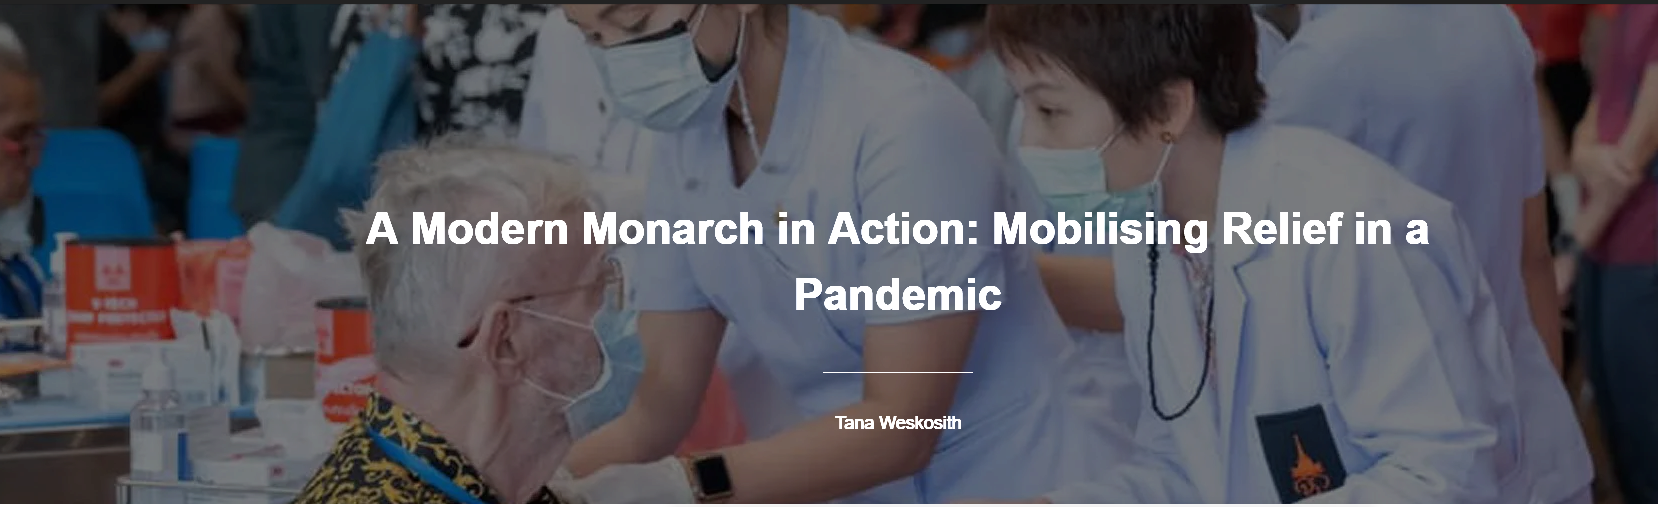 A_Modern_Monarch_in_Action_Mobilising_Relief_in_a_Pandemic